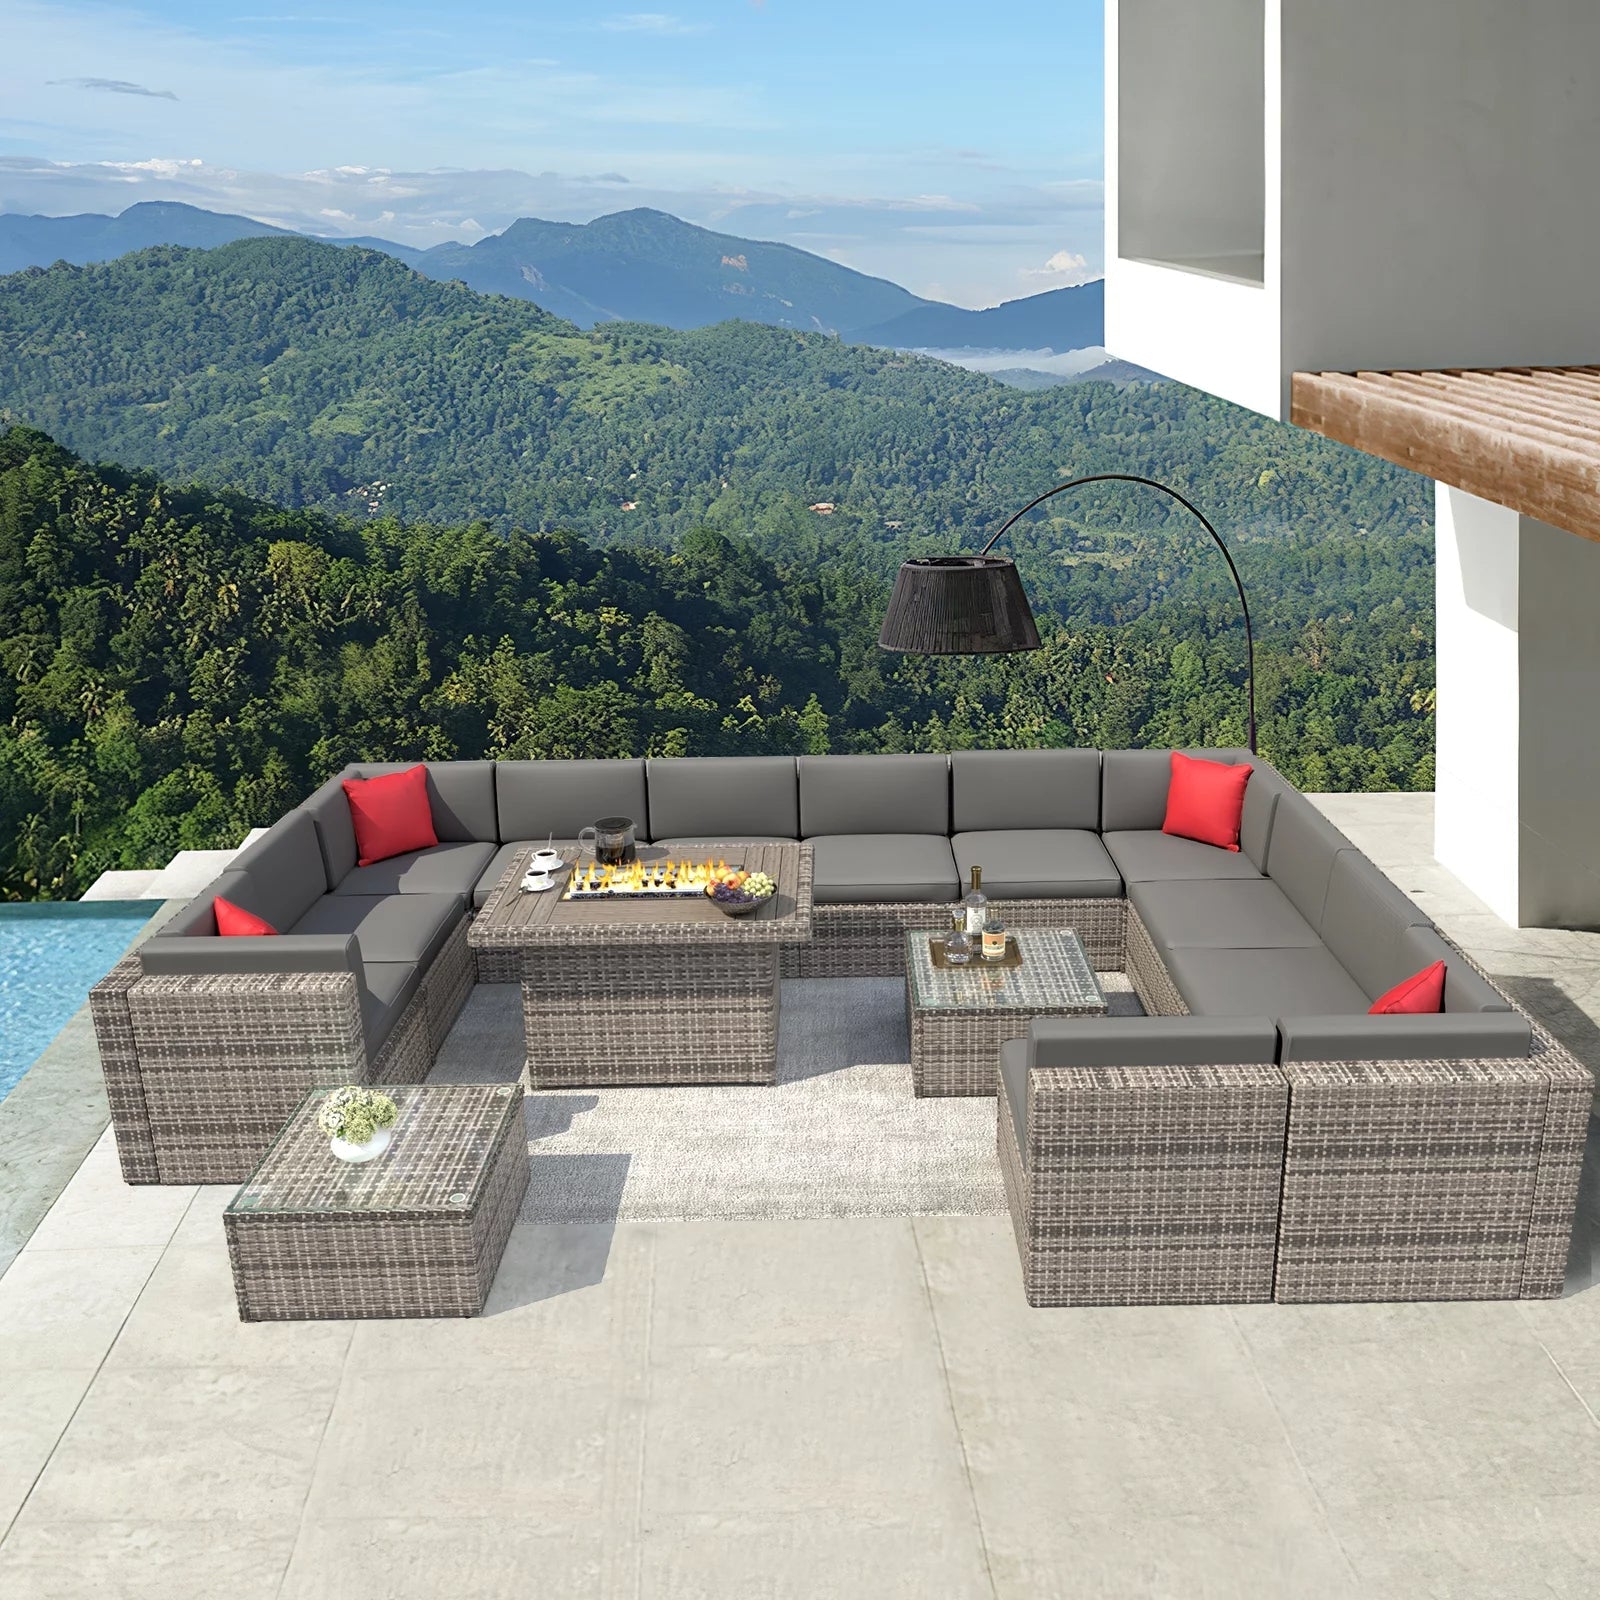 15-Piece Patio Furniture Set with Propane Fire Pit Table Wicker Outdoor Conversation Set, Gray